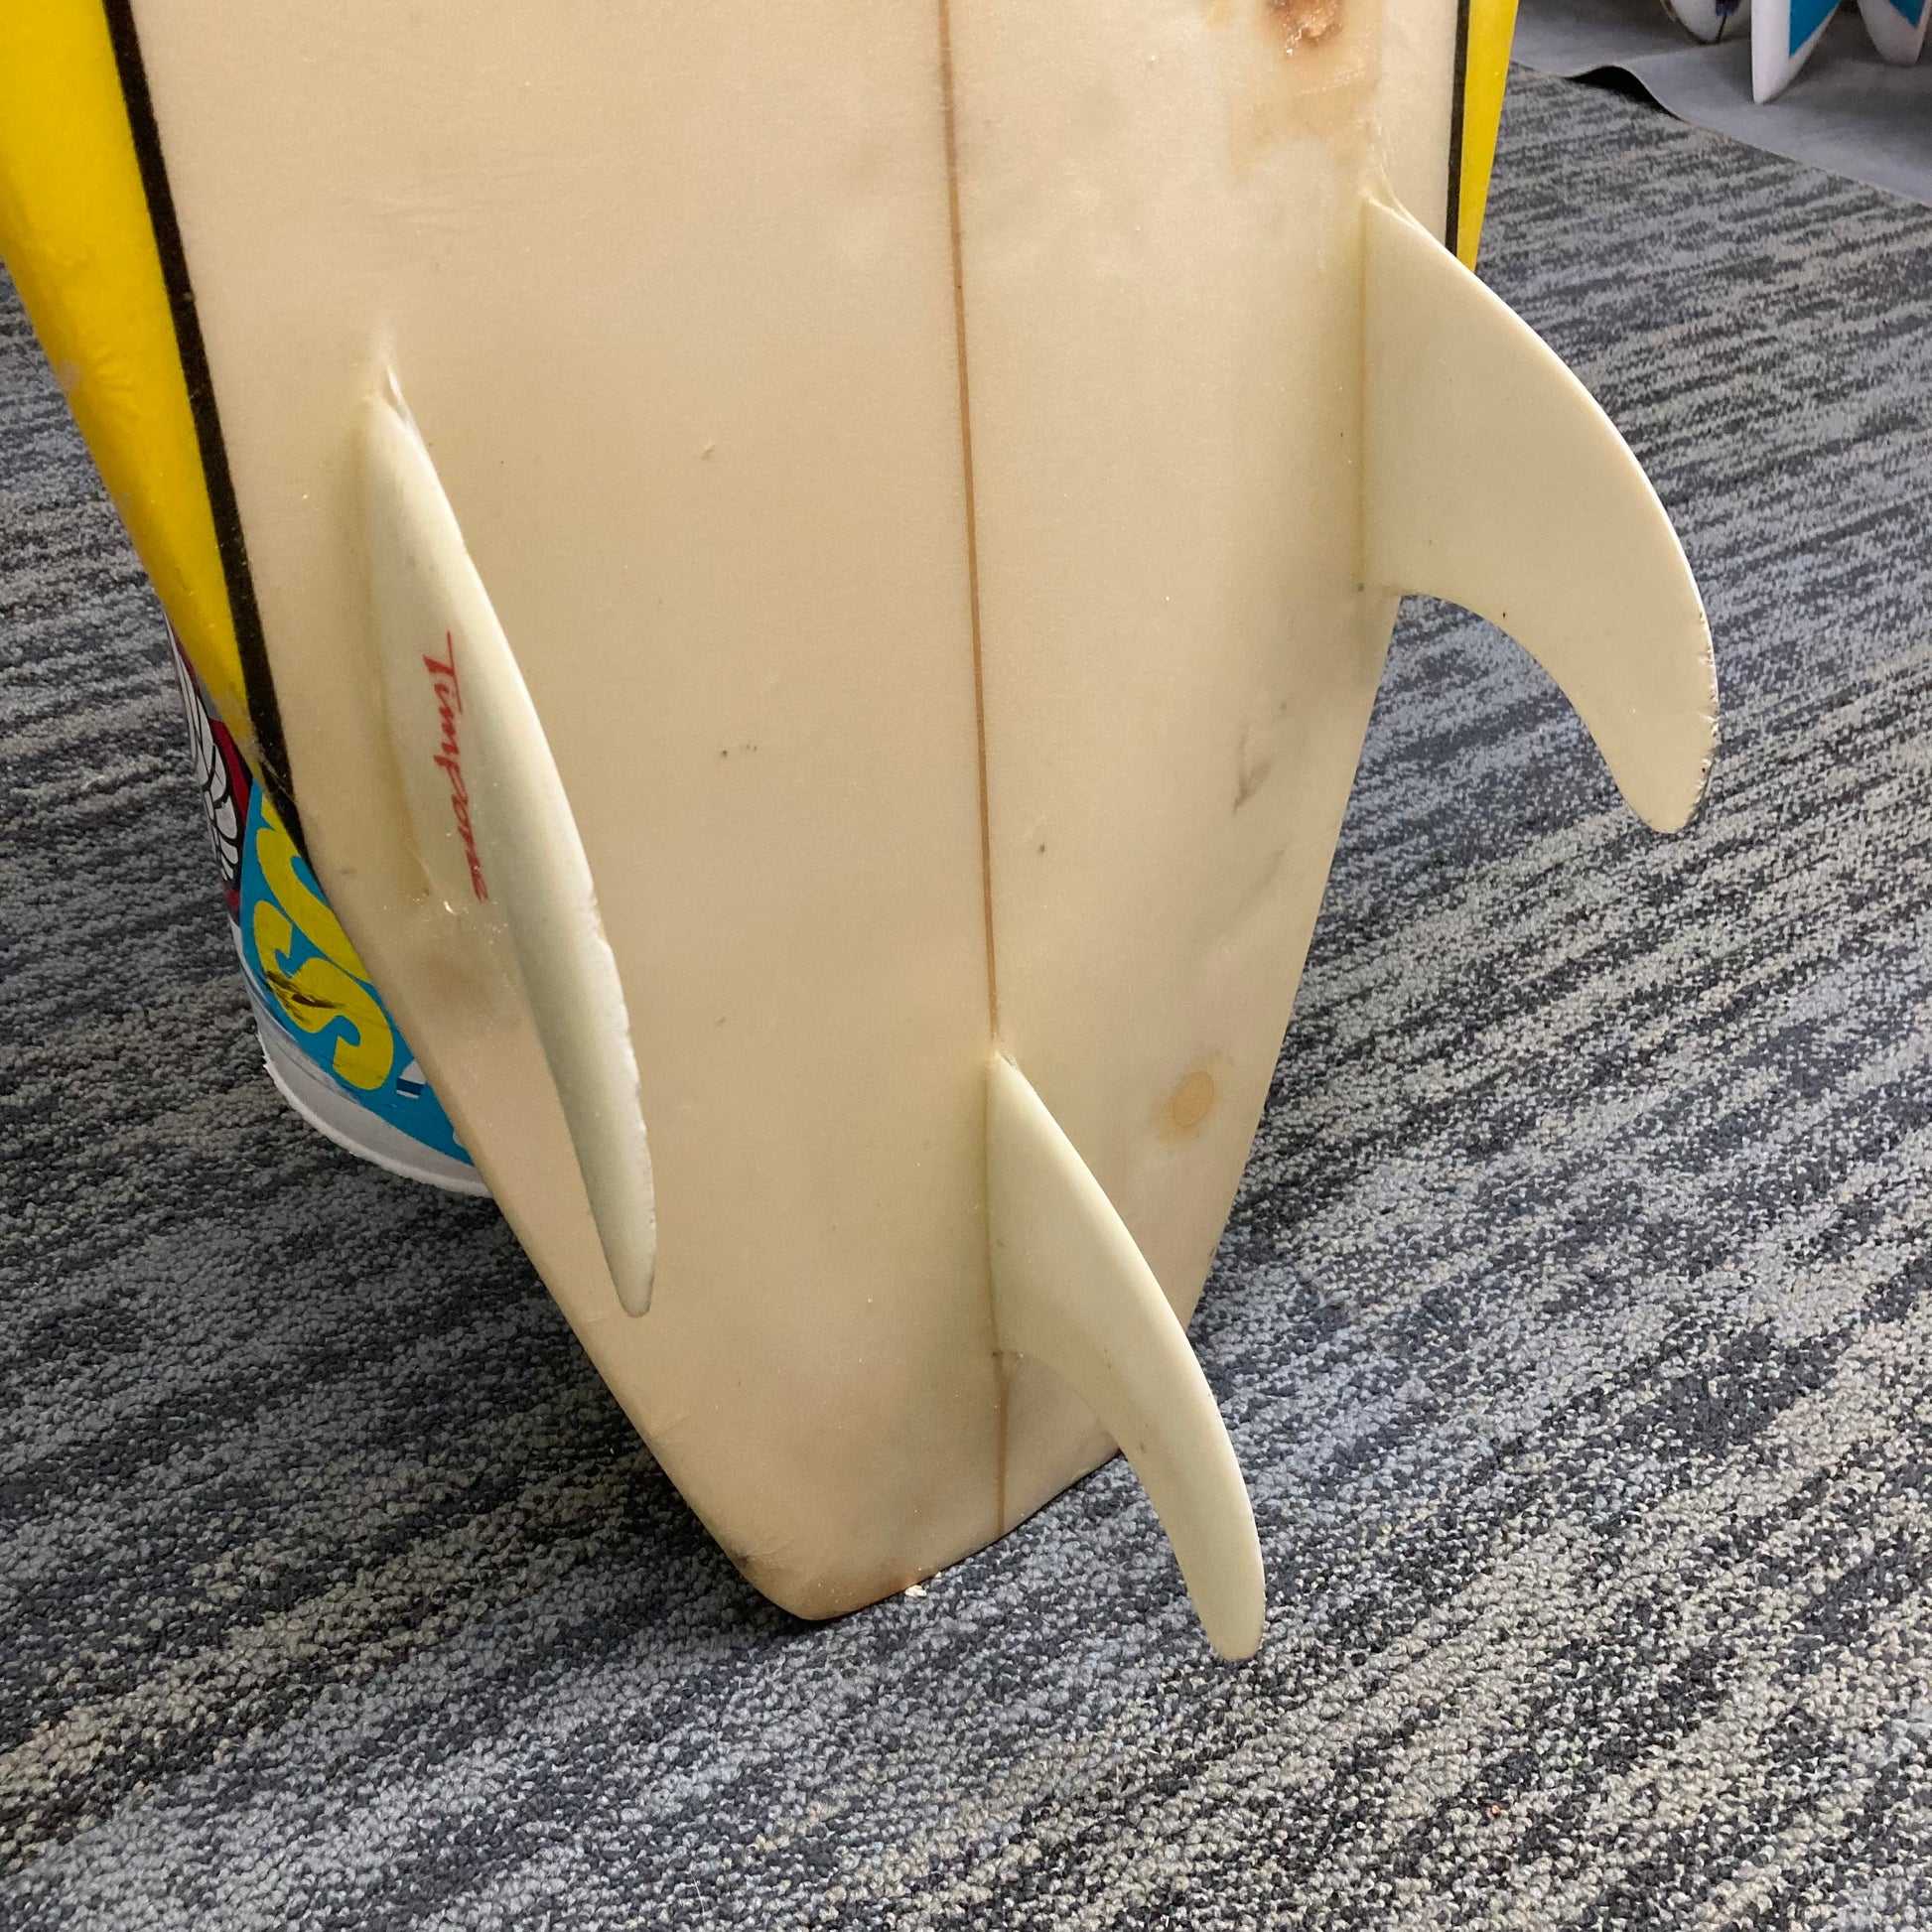 Used 6'7 Timpone